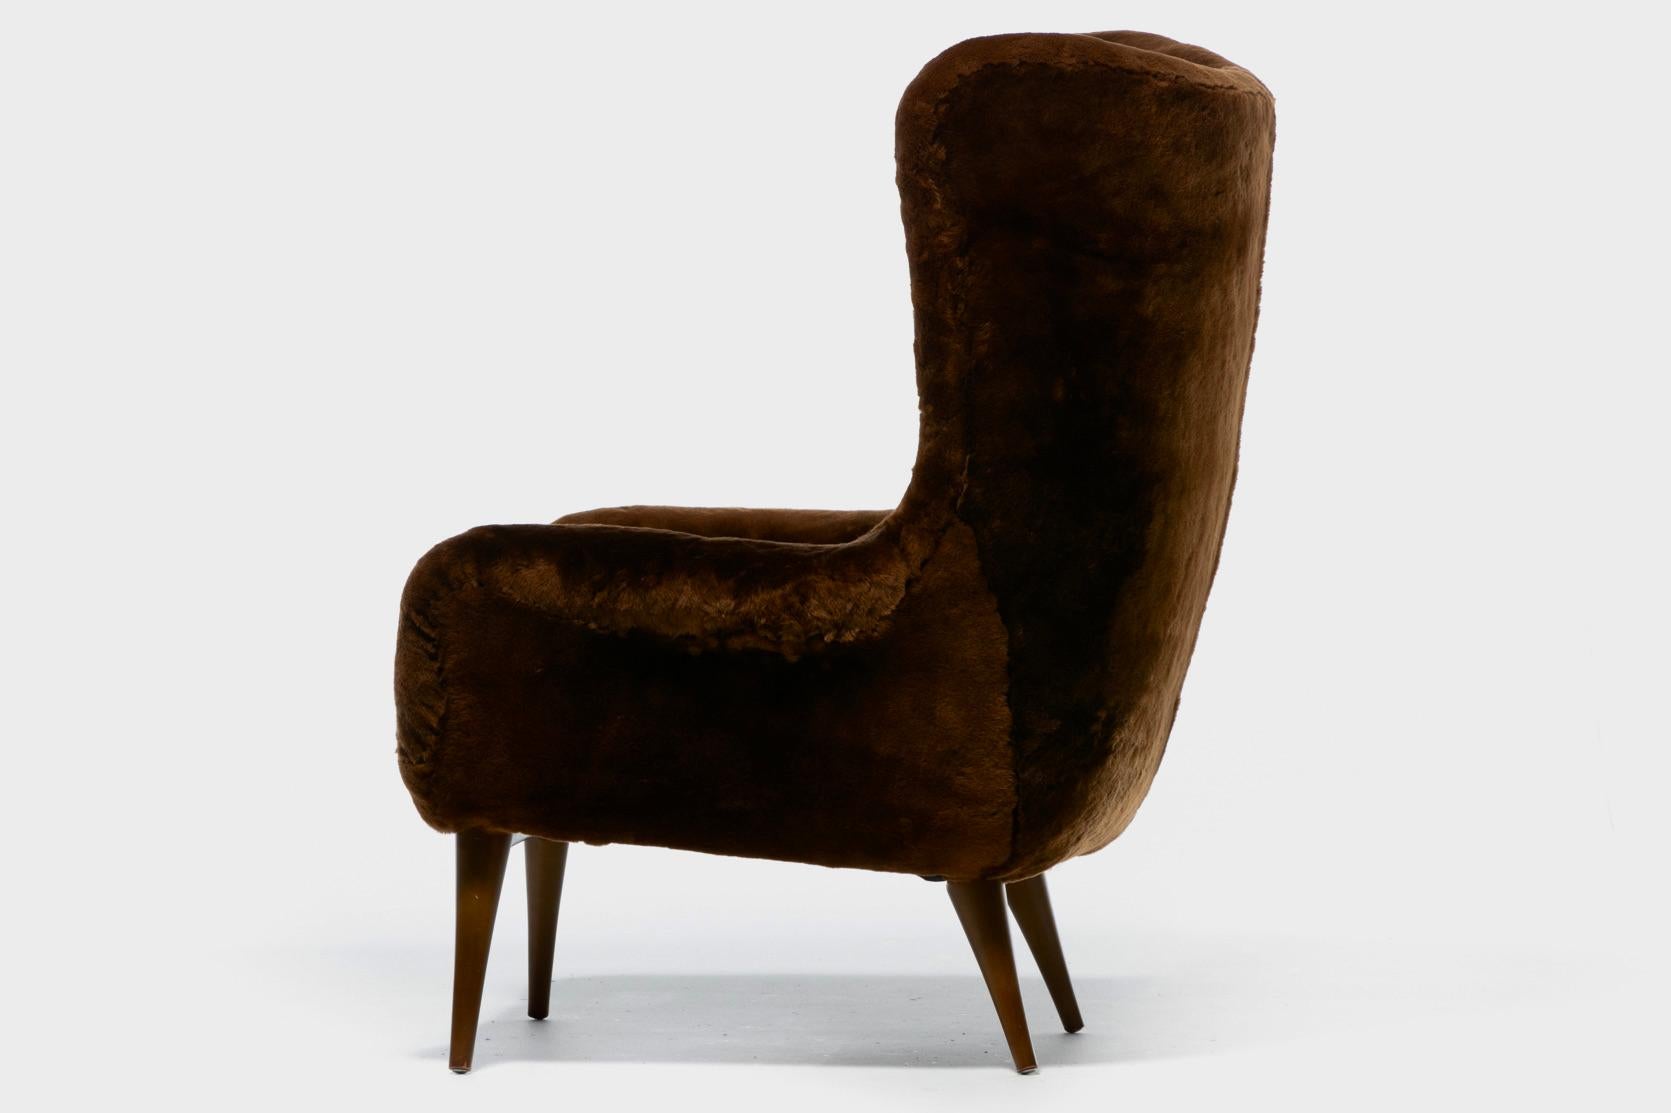 Karpen Wingback Chairs in Luxuriously Soft Milk Chocolate Shearling, circa 1950s For Sale 1